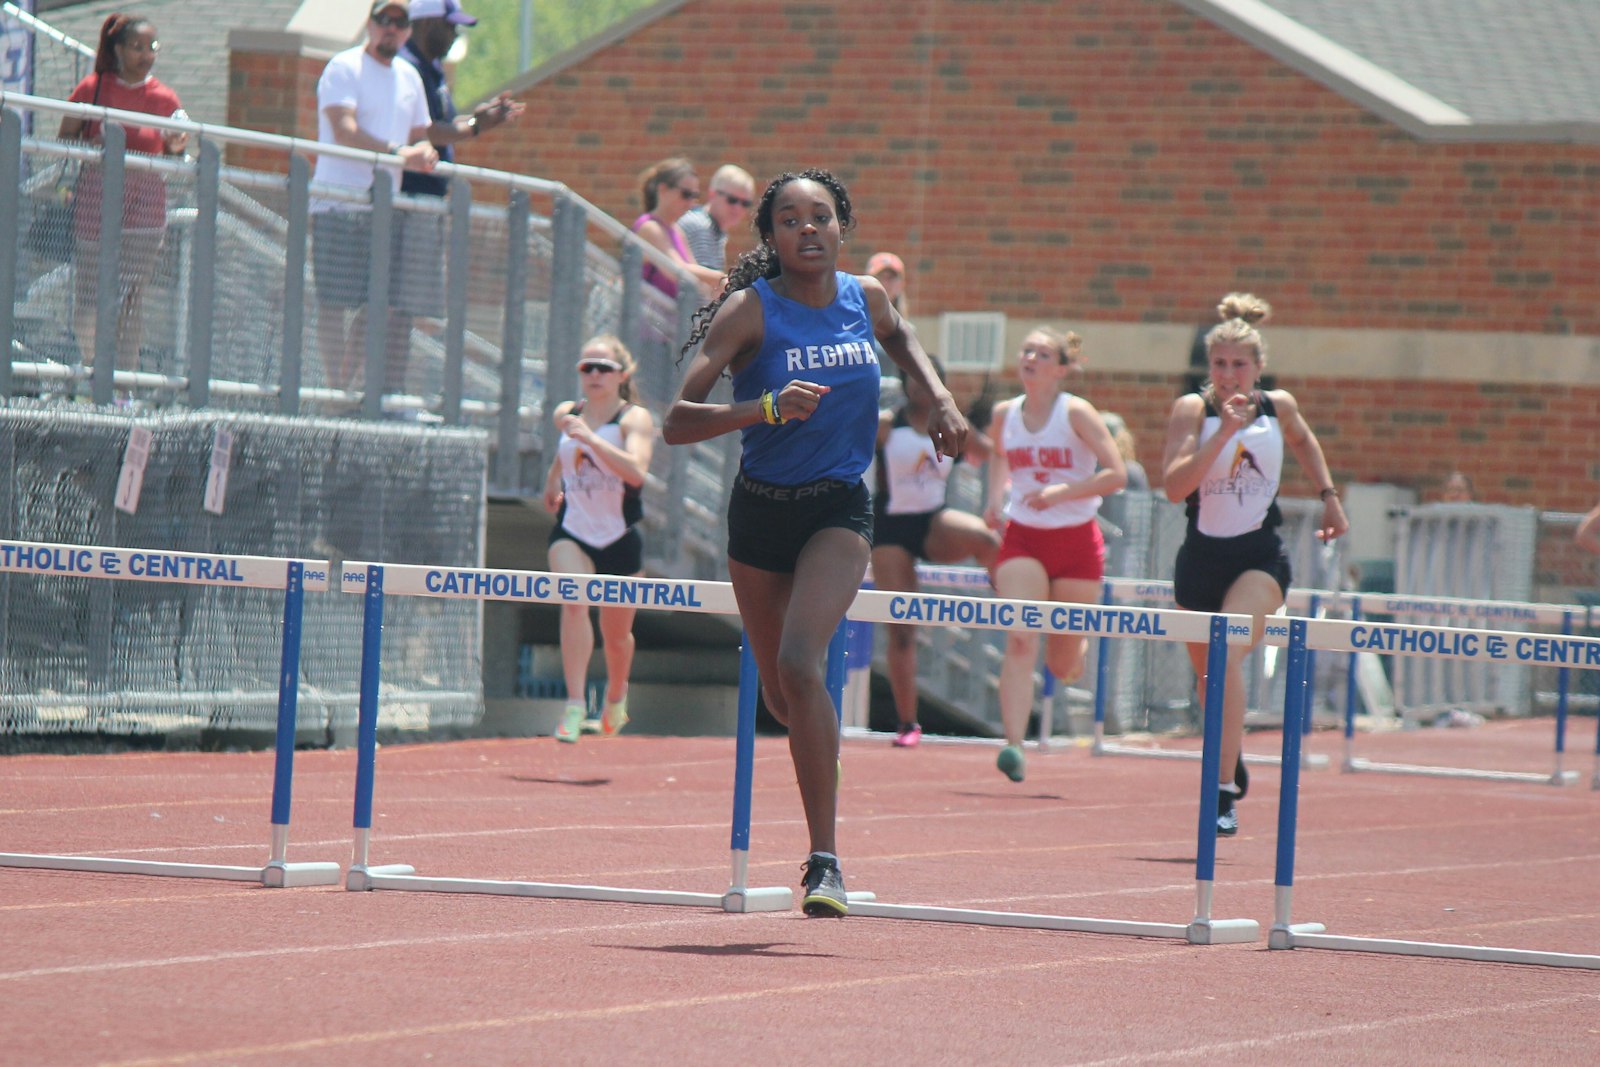 Warren Regina hurdler Ella Jenkins won the 300 low hurdles (44.99) and was runner-up in the 100 high hurdles (14.97) at the Division 2 meet. (Photo by Wright Wilson | Special to Detroit Catholic)